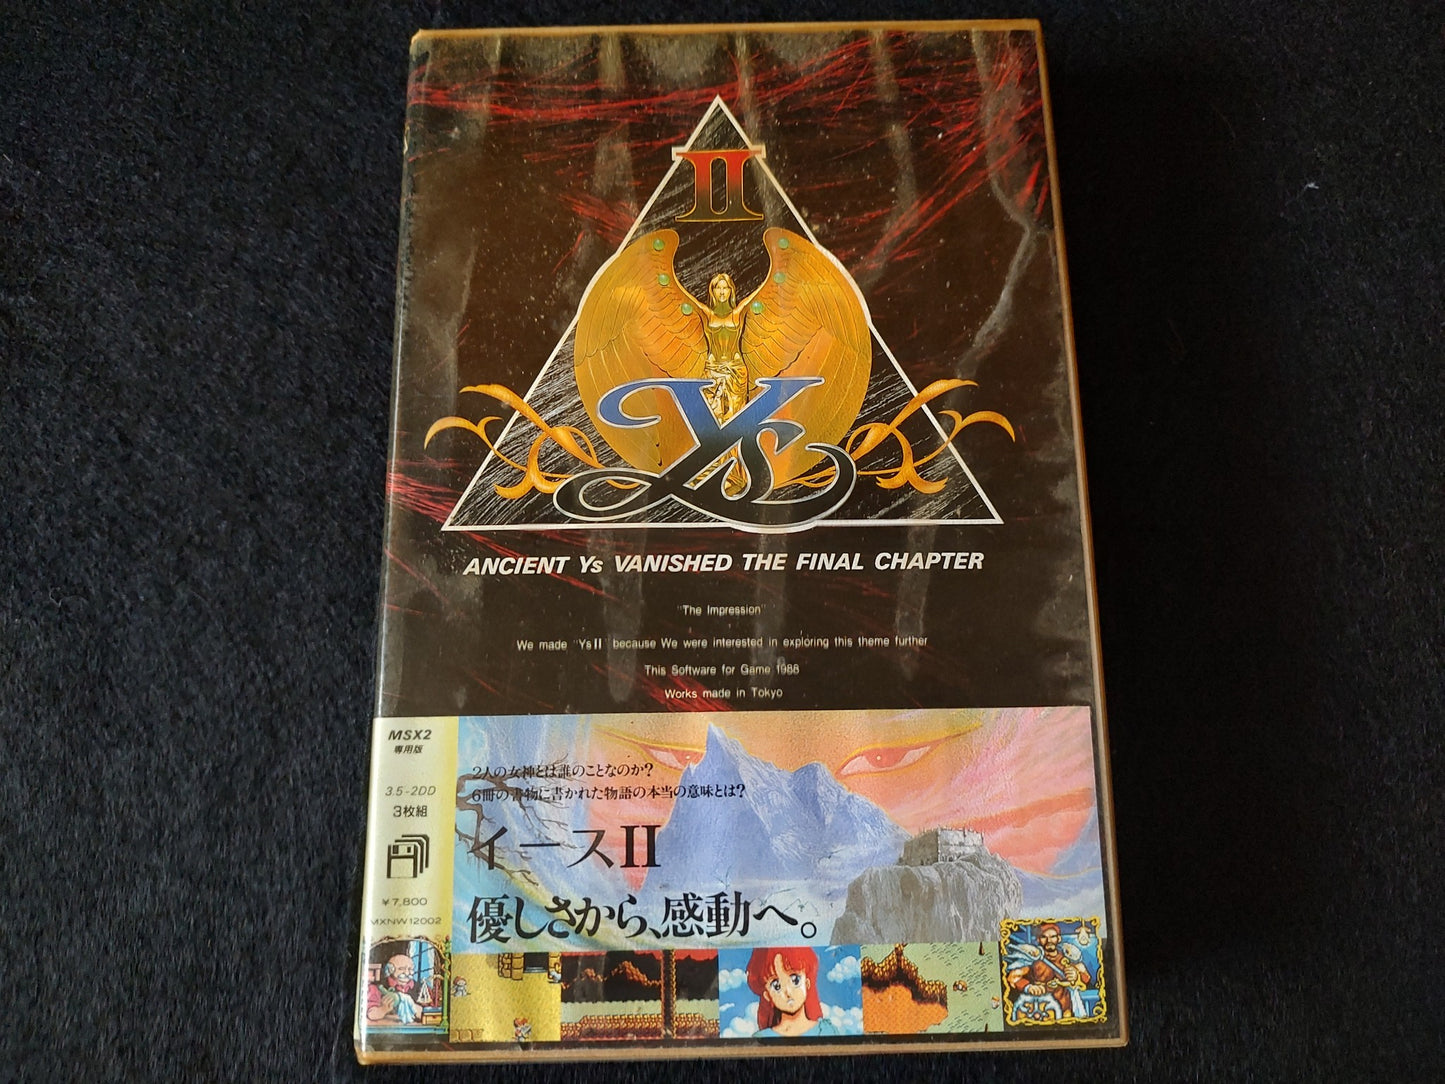 Ys 2 - Ancient Ys Vanished The Final Chapter -MSX2 Game Disk, Manual, Box-f0719-